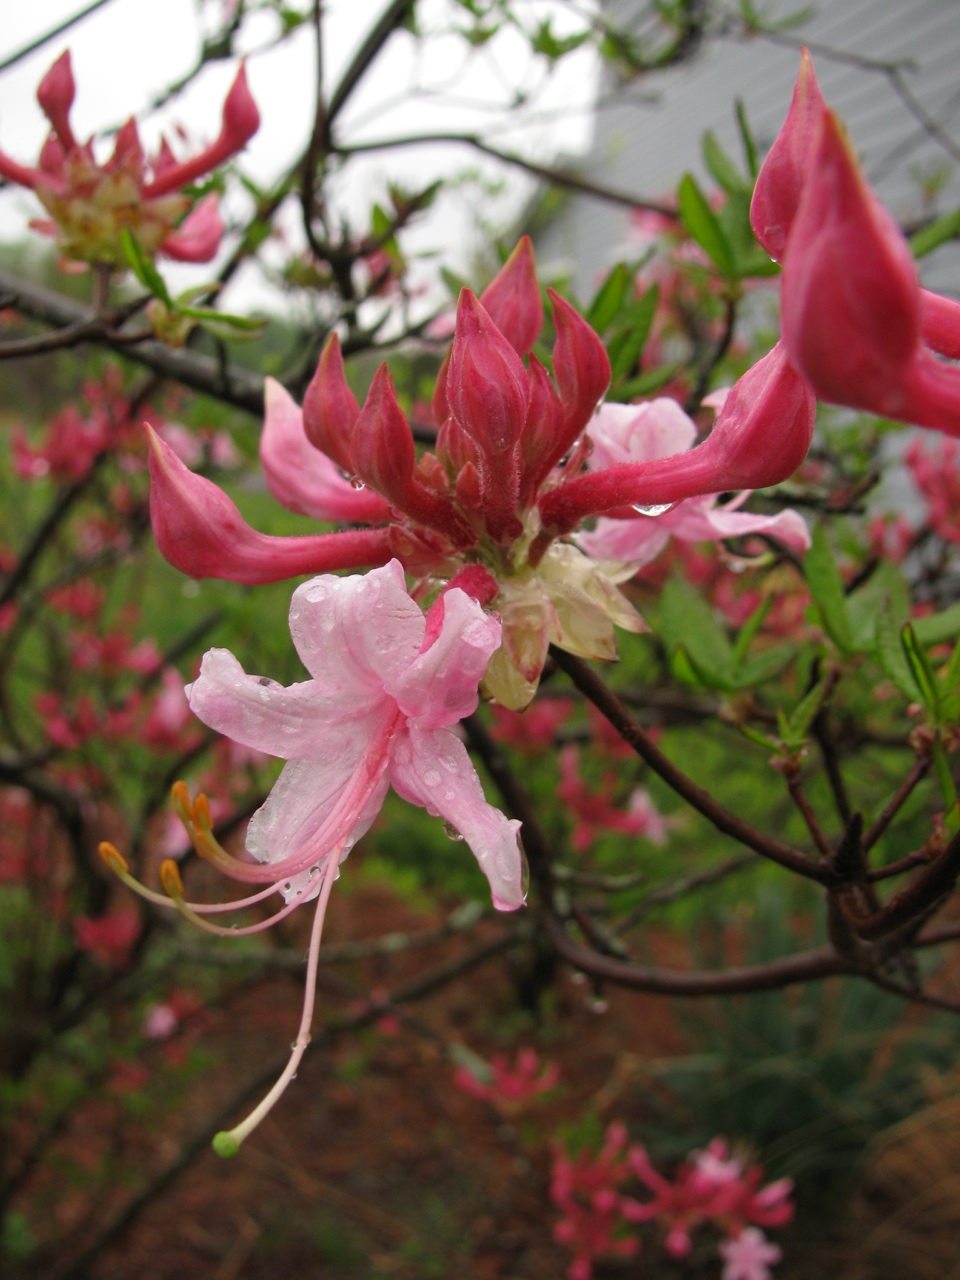 The Scientific Name is Rhododendron canescens. You will likely hear them called Piedmont Azalea, Southern Pinxter Azalea, Wild Azalea, Hoary Azalea, Mountain Azalea, Florida Pinxter Azalea. This picture shows the Beautiful pink flowers and buds of Rhododendron canescens